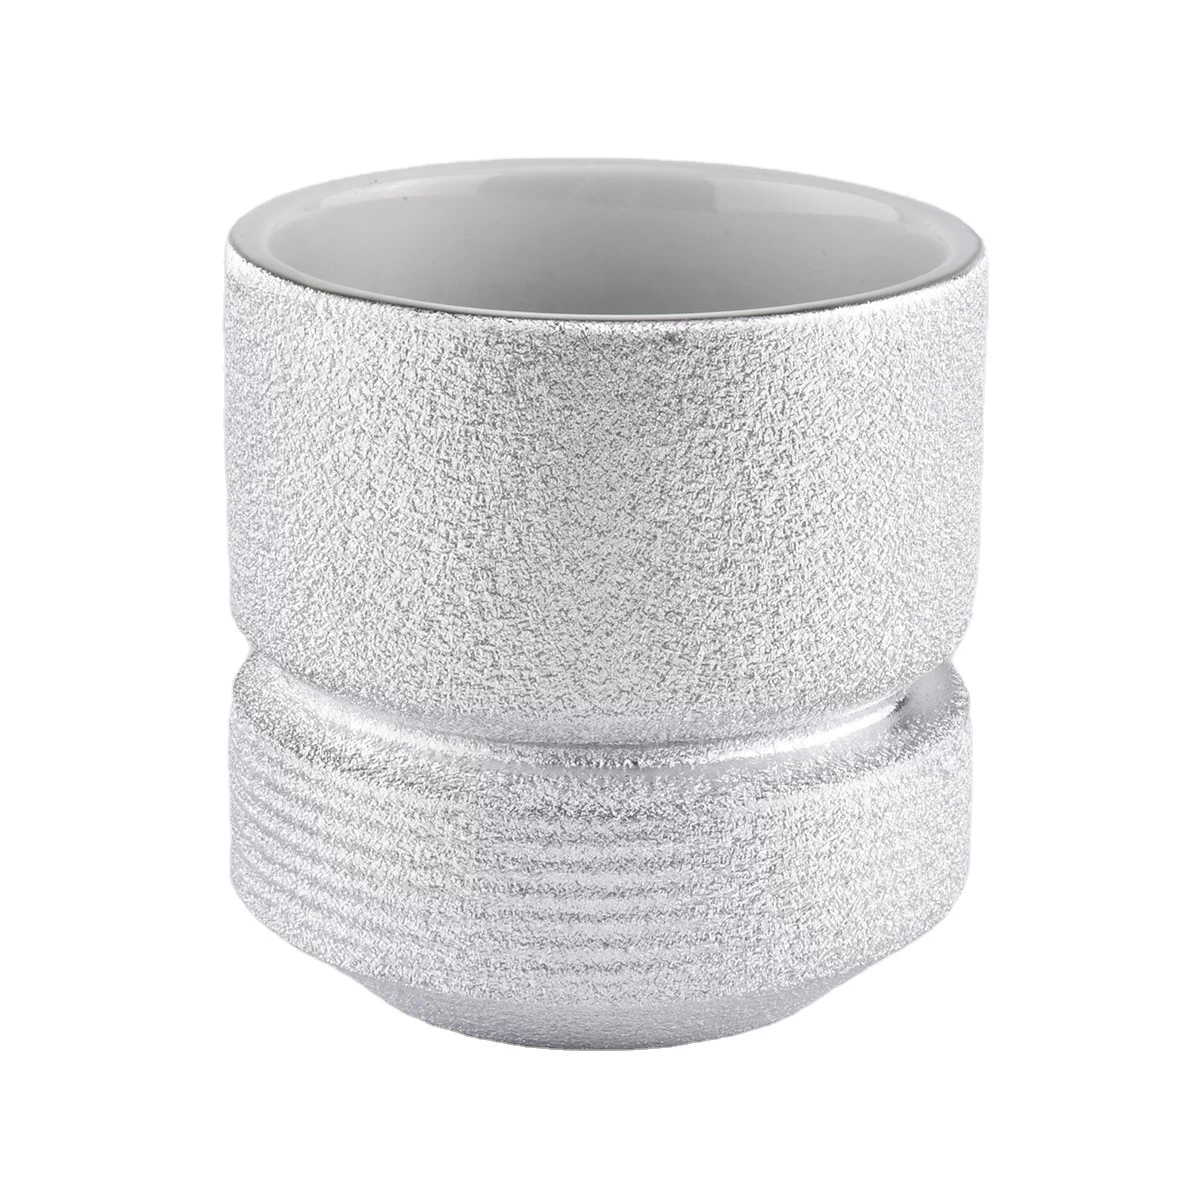 Silver Spray Ceramic Candle Holders 400ml wholesale  for candle making